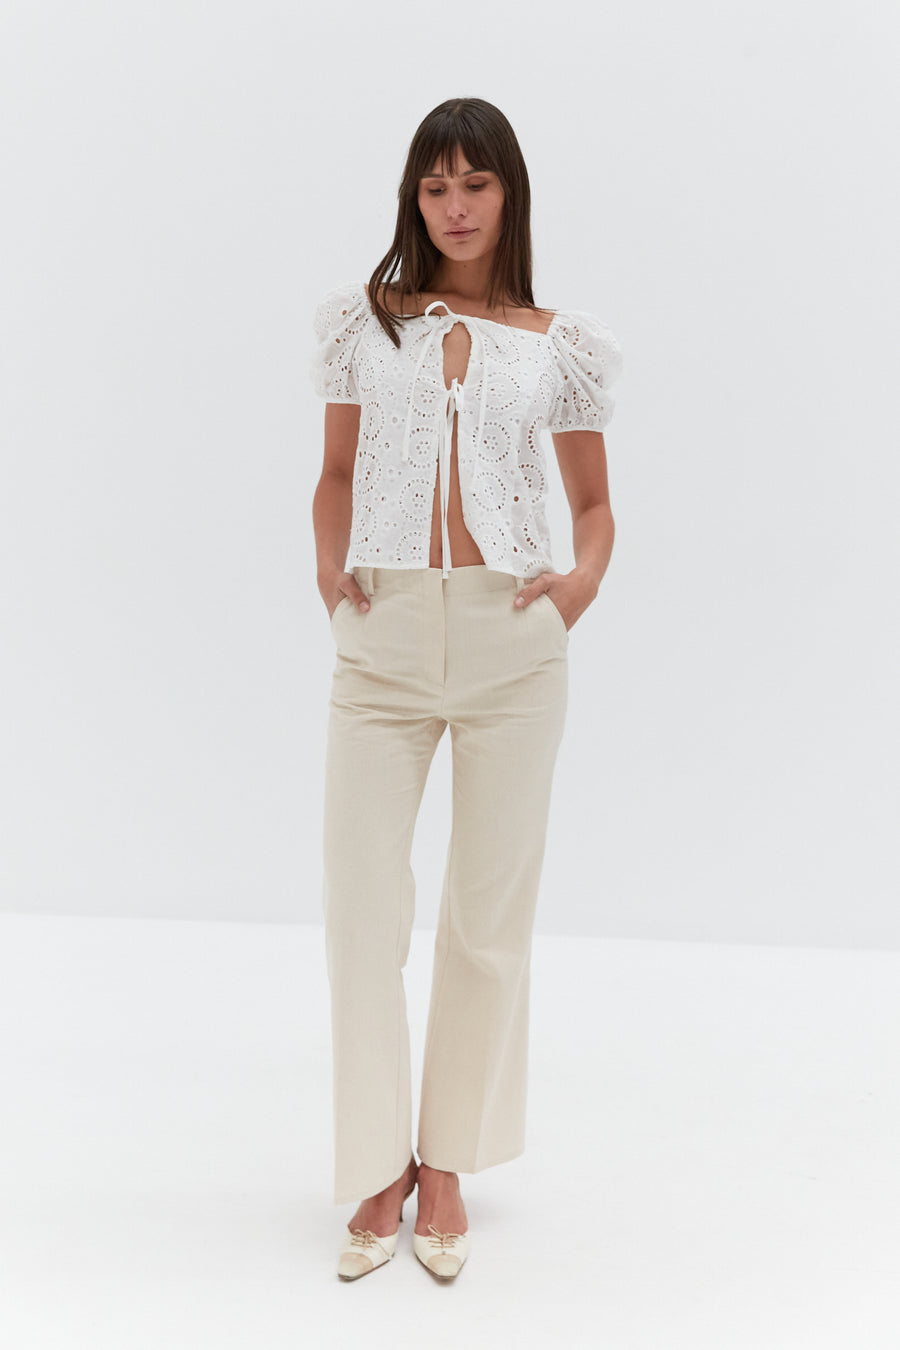 Rio Linen Trousers - Ivory